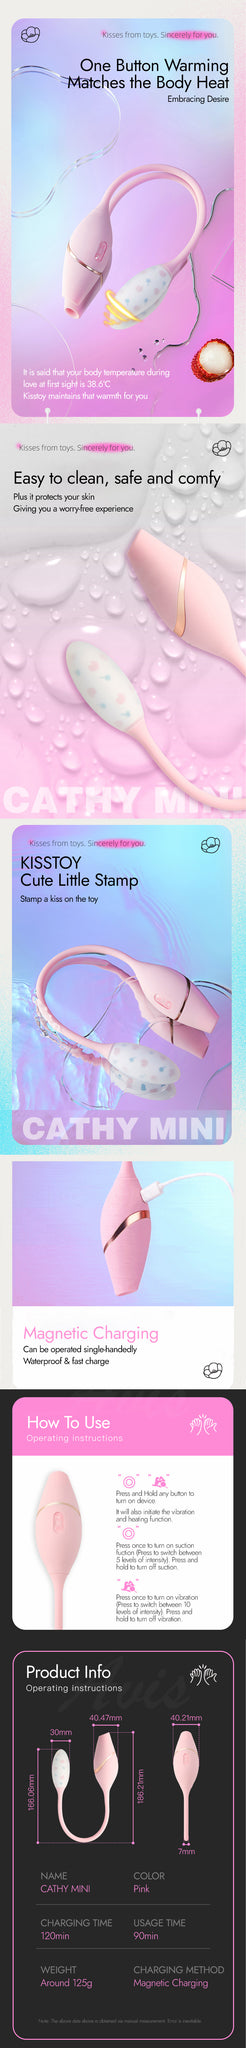 pink-cathy  mini- sex toy-vibrator-clitoral - suction